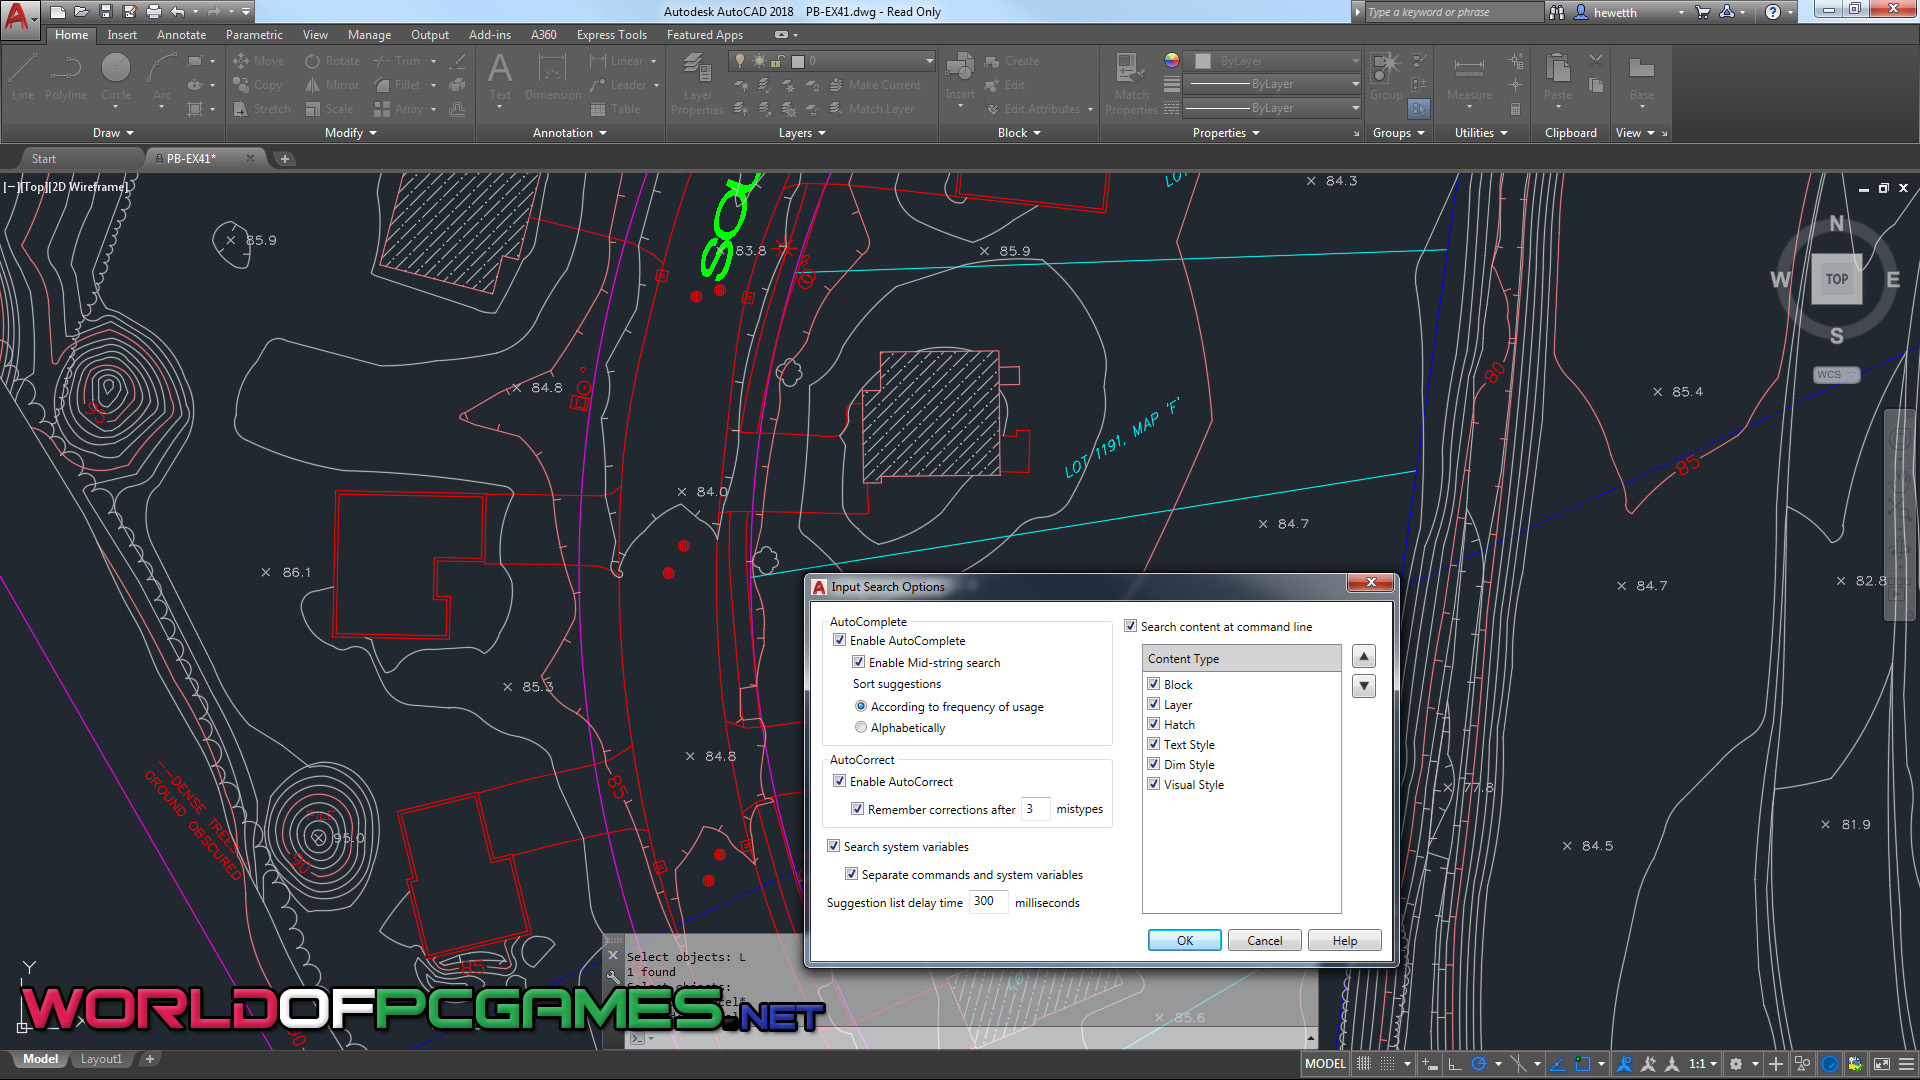 Autodesk AutoCAD 2018 Free Download By worldof-pcgames.netm